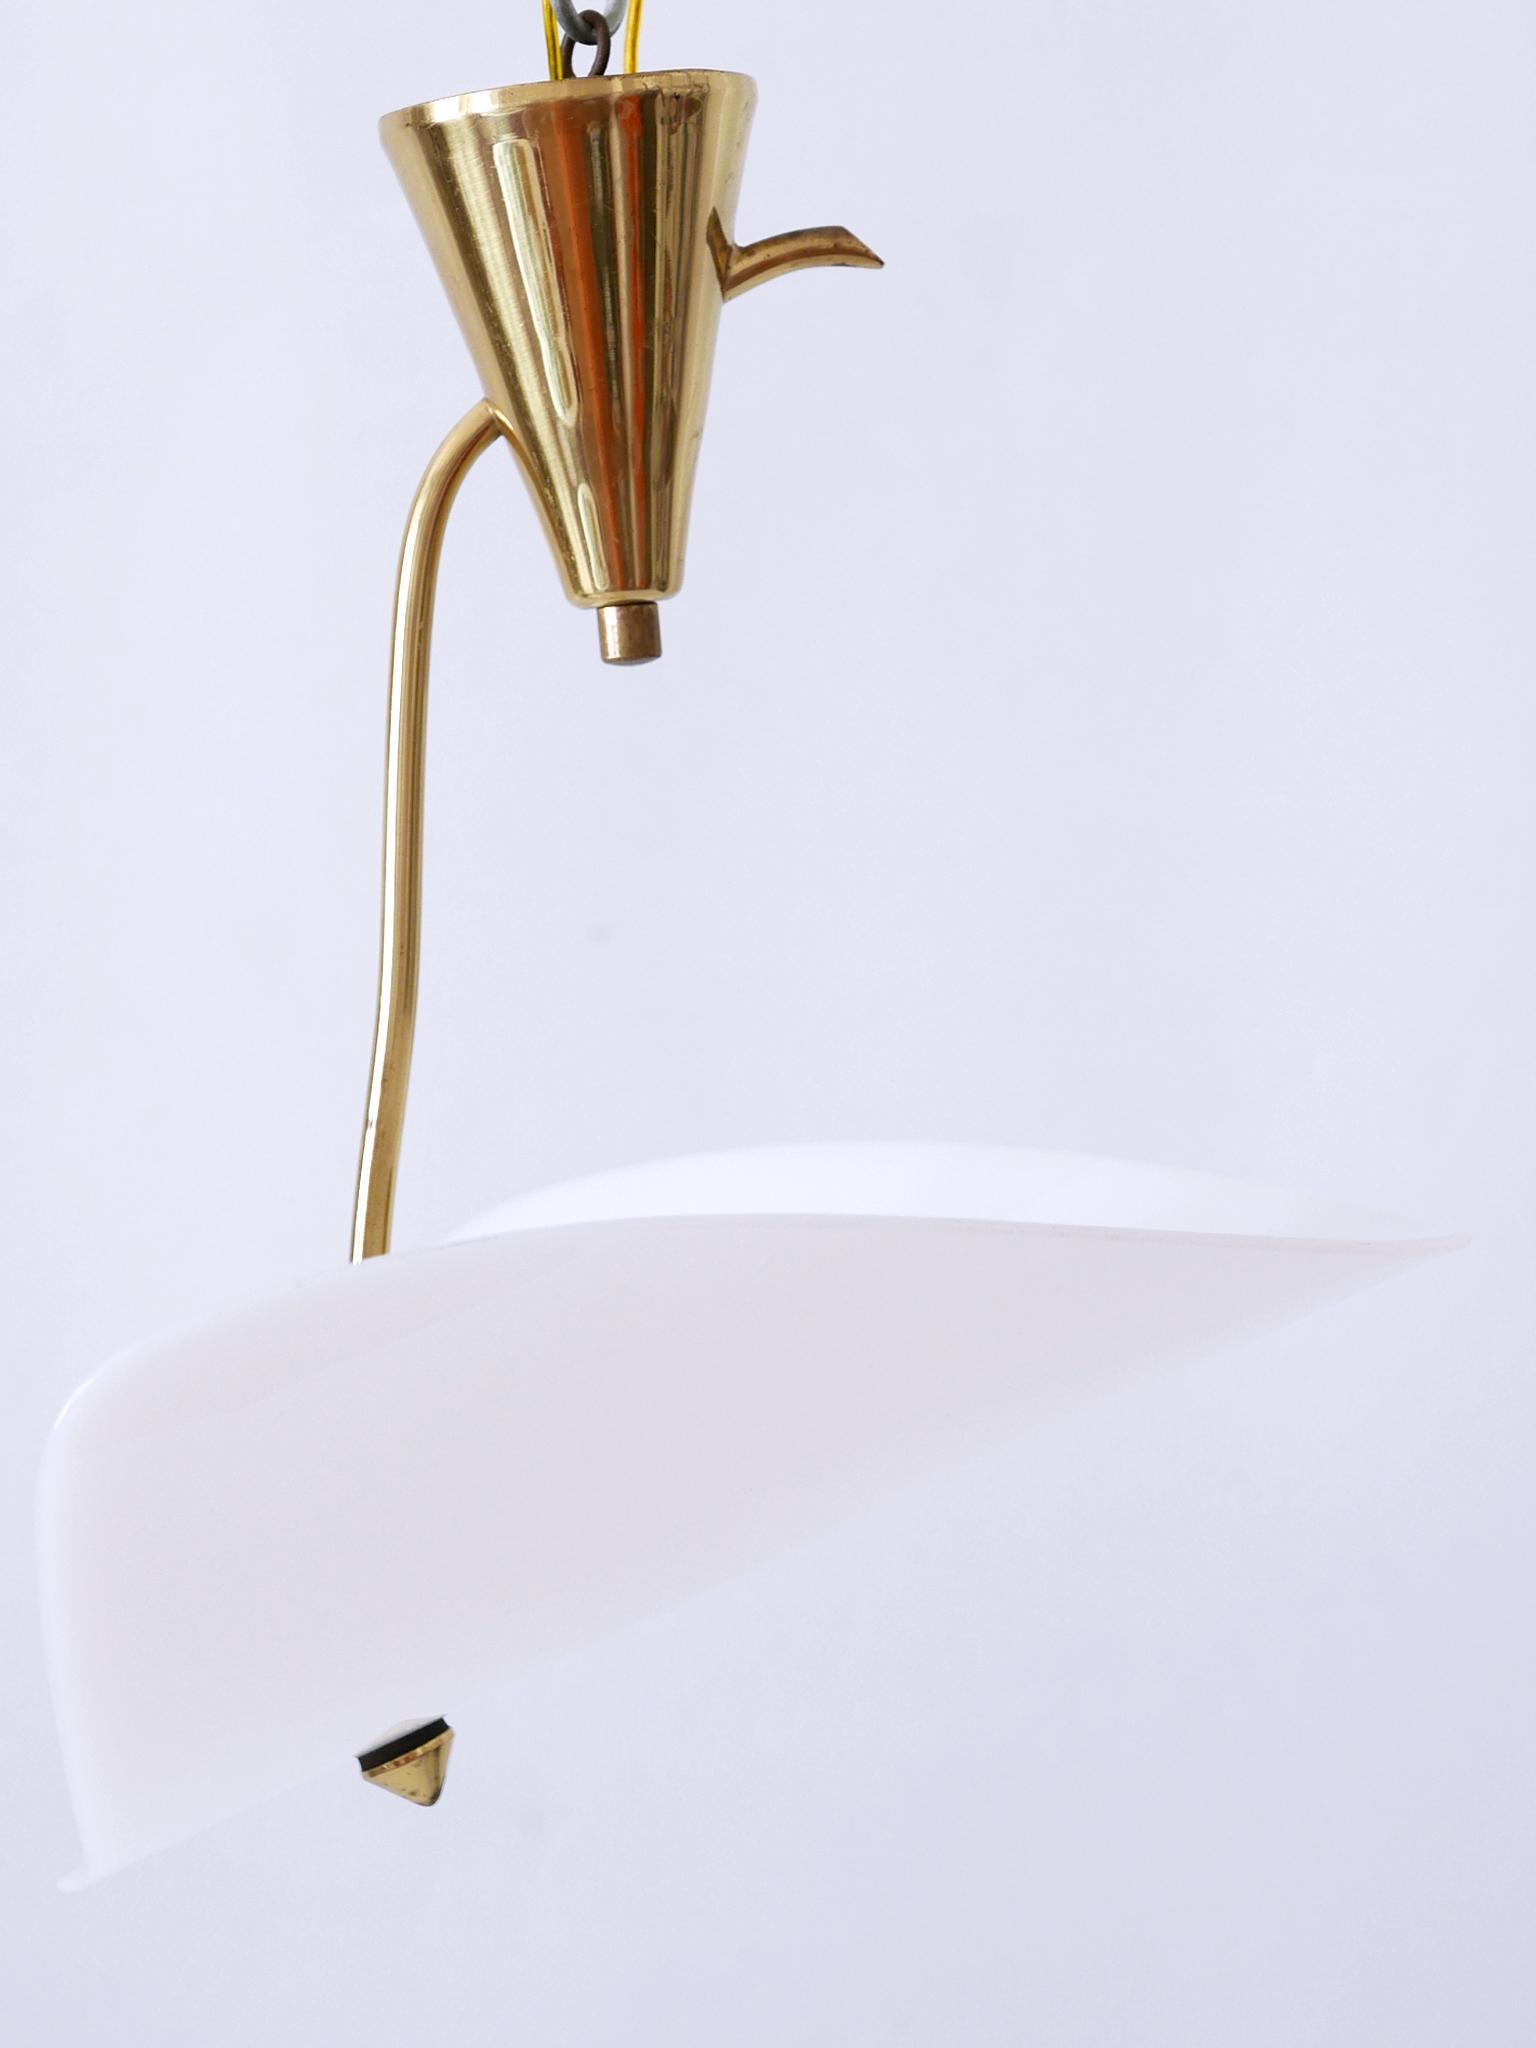 Exceptional and elegant Mid-Century Modern lucite and brass ceiling lamp / pendant light. Designed and manufactured probably in Germany, 1960s.

Executed in white lucite and brass, the ceiling light or pendant lamp has 1 x E27 / E26 Edison screw fit